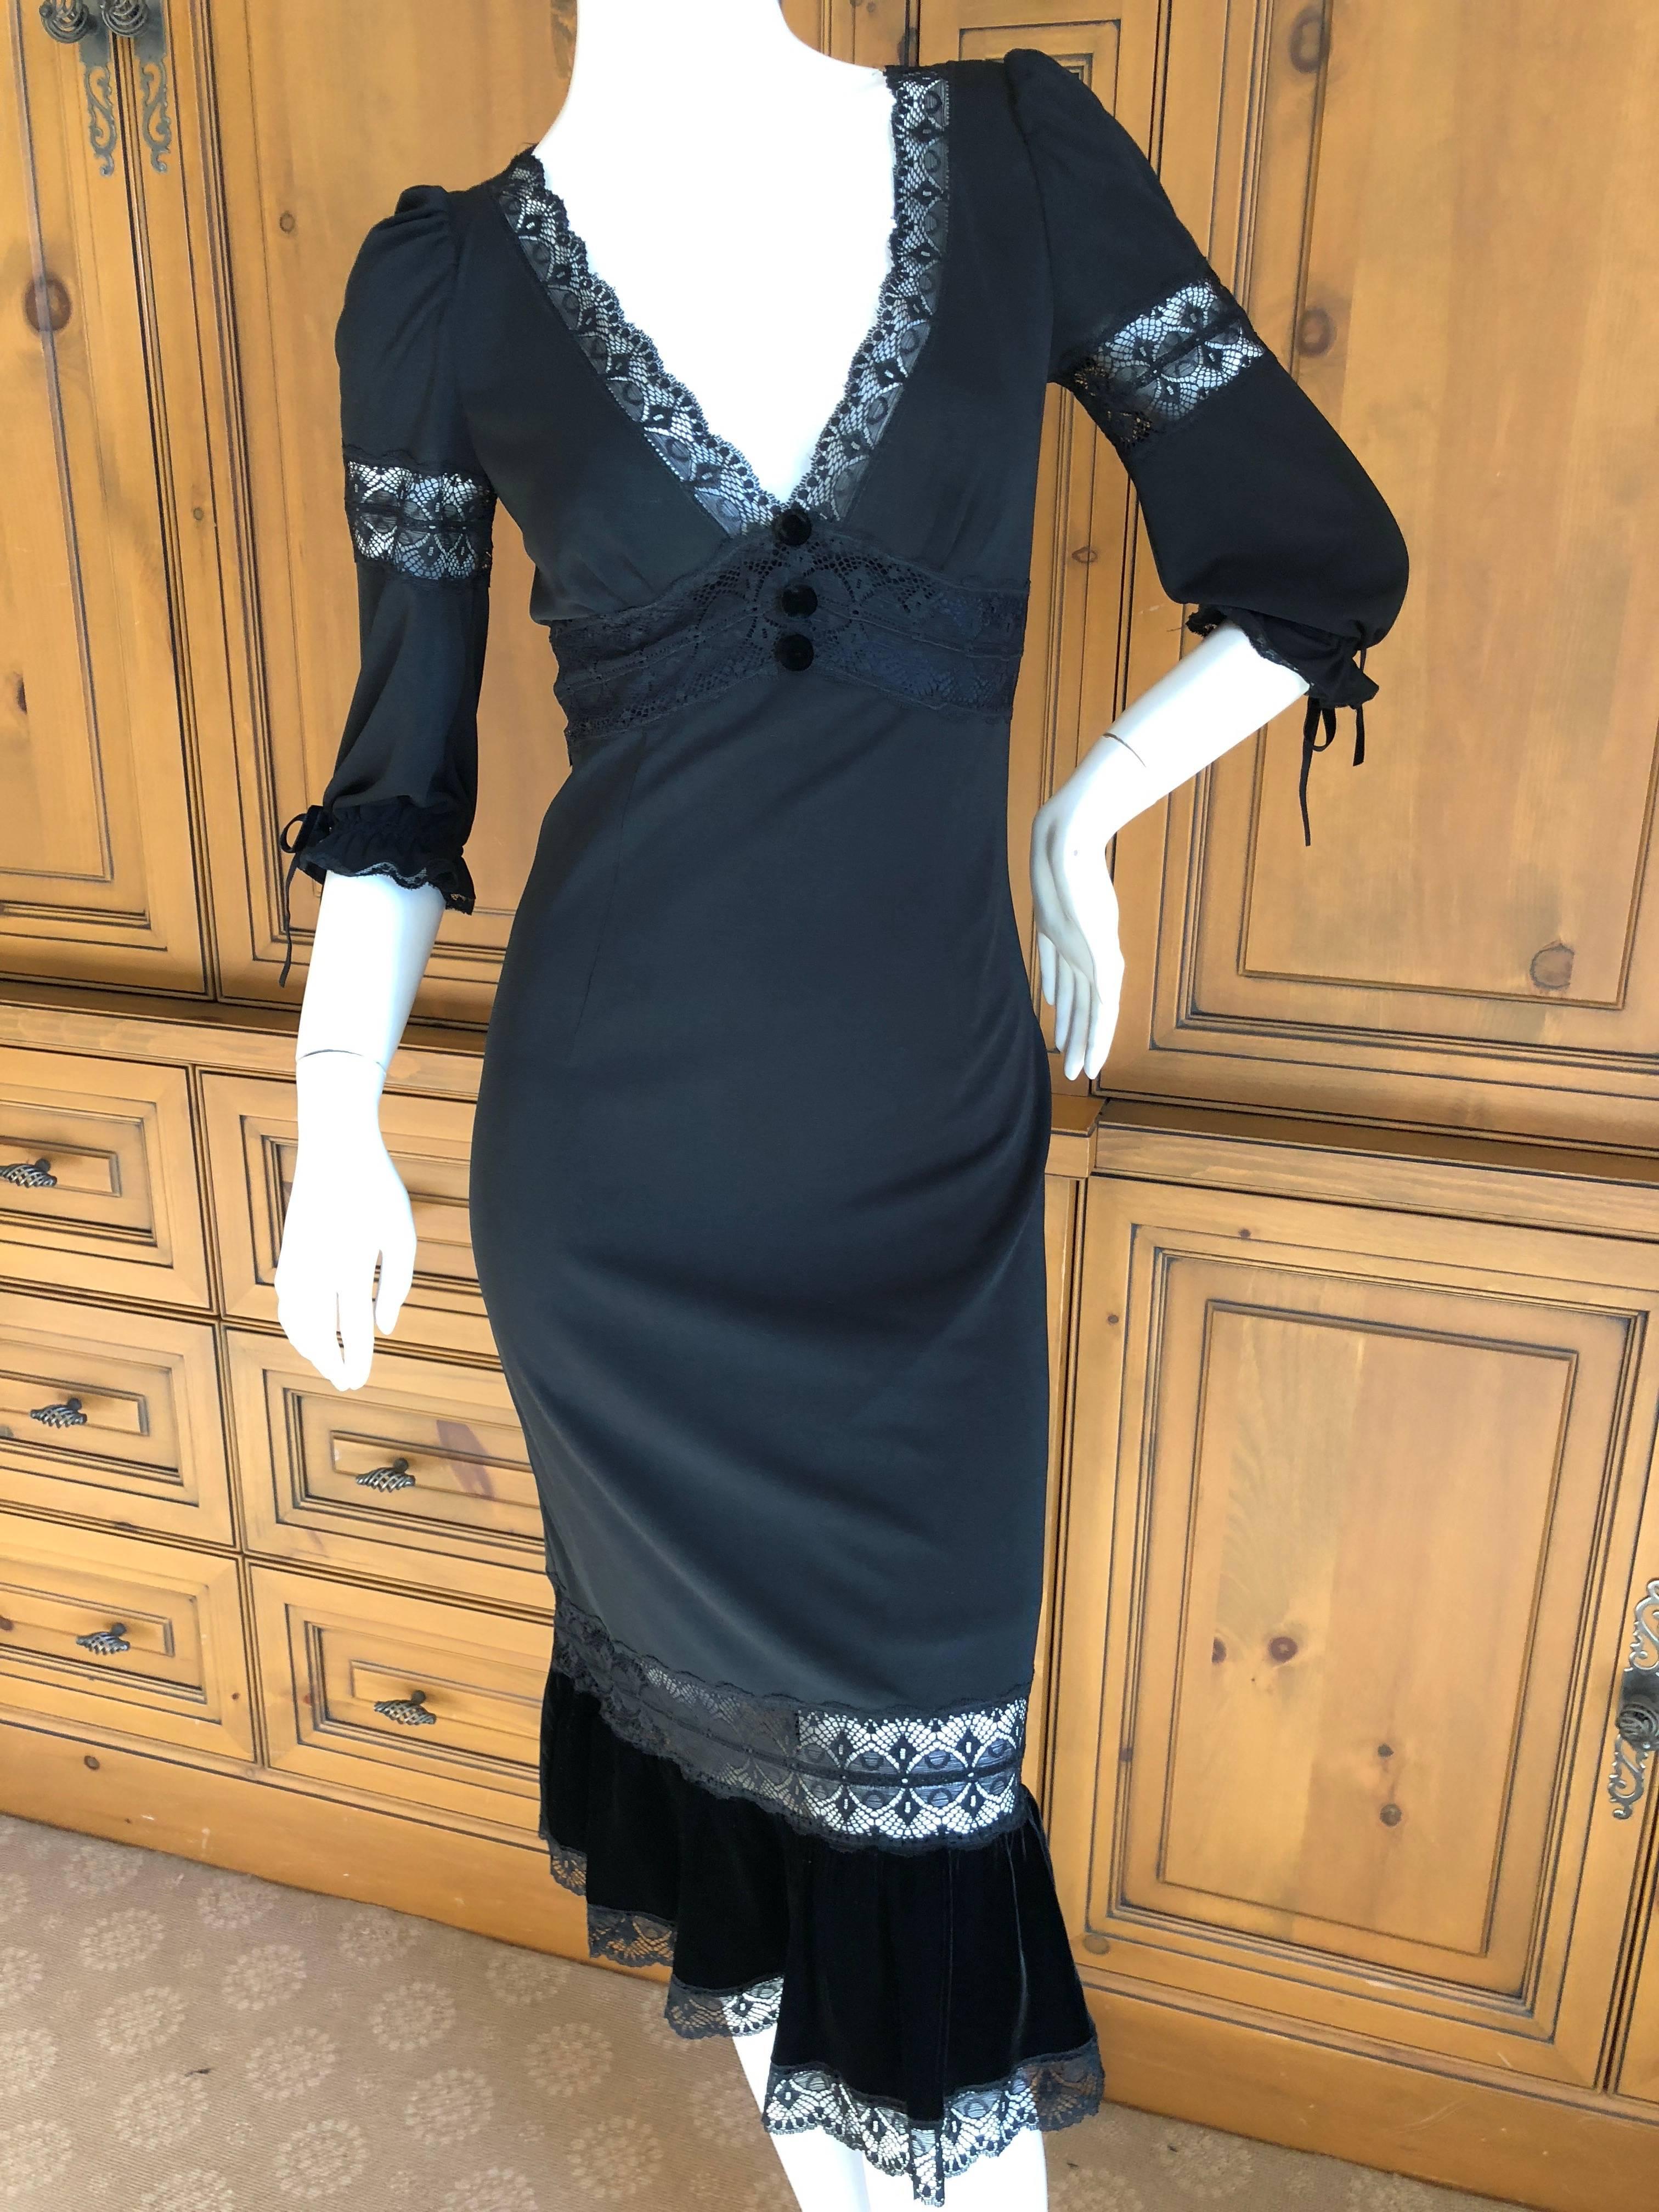 D&G Dolce & Gabbana Sheer Lace Panel Little Black Dress with Velvet Trim In Excellent Condition For Sale In Cloverdale, CA